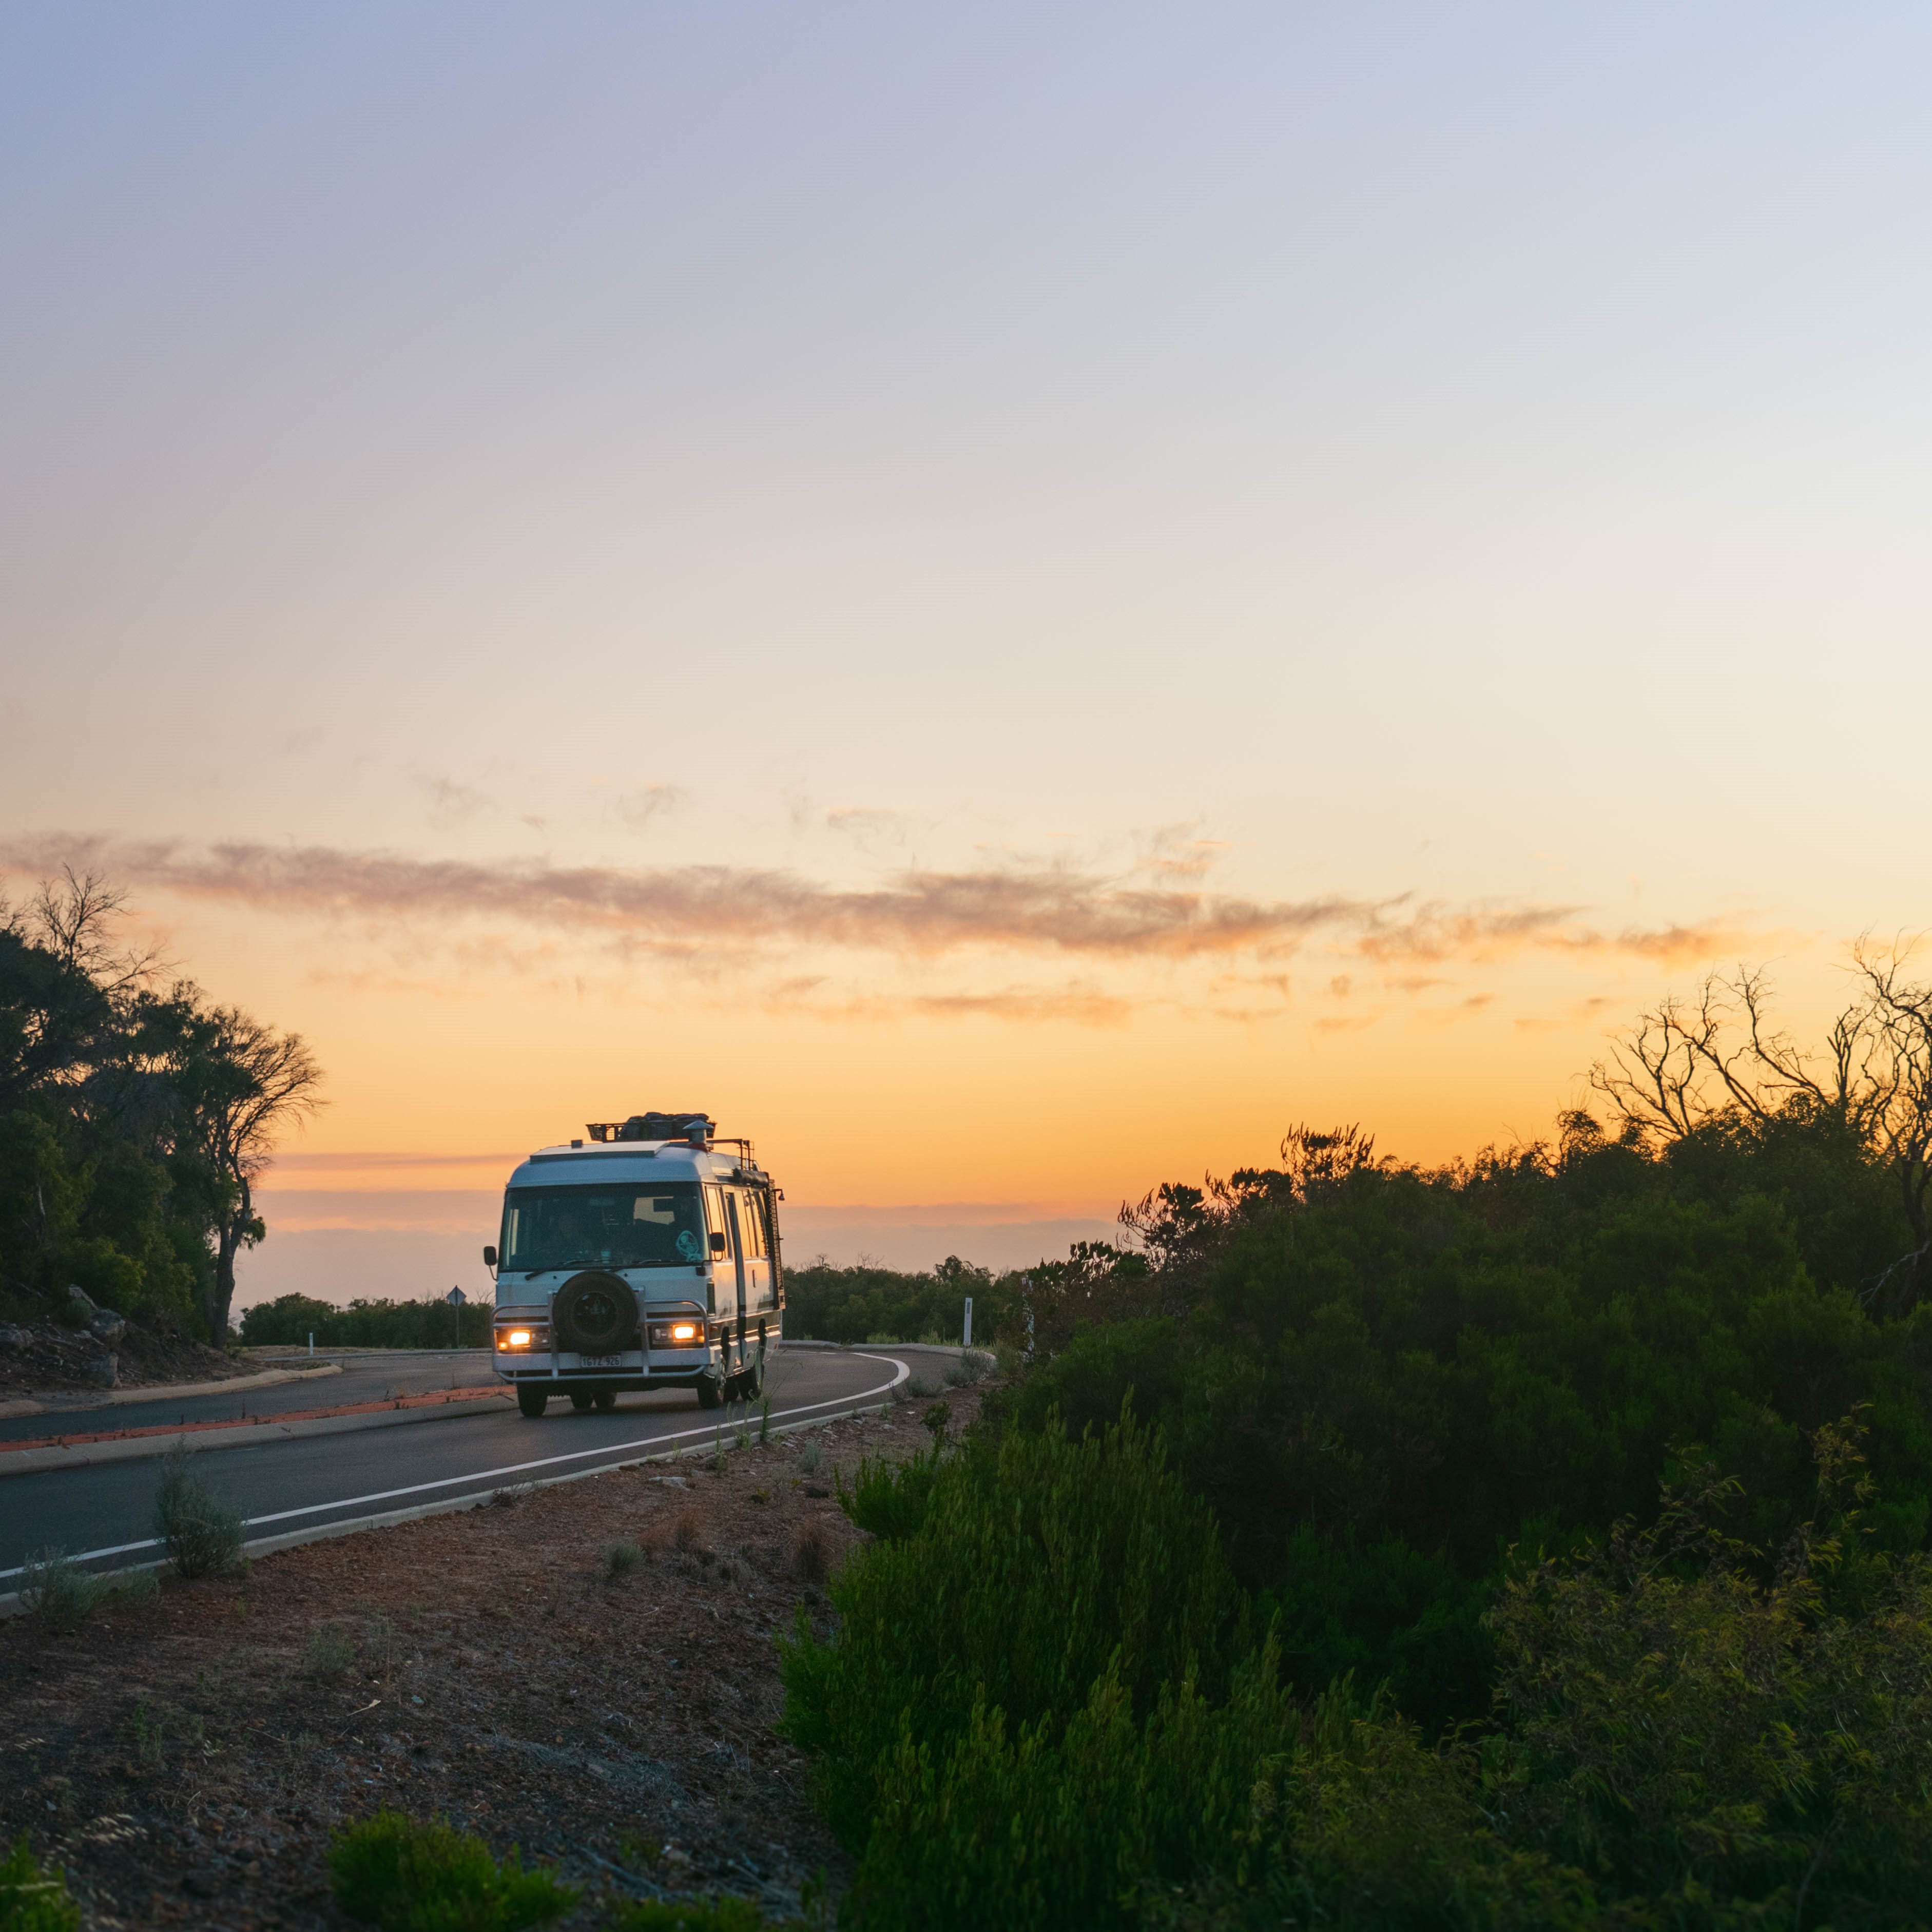 Landscape shot showing a road cutting through nature, the sun is setting and a van is in the middle of the road driving past.